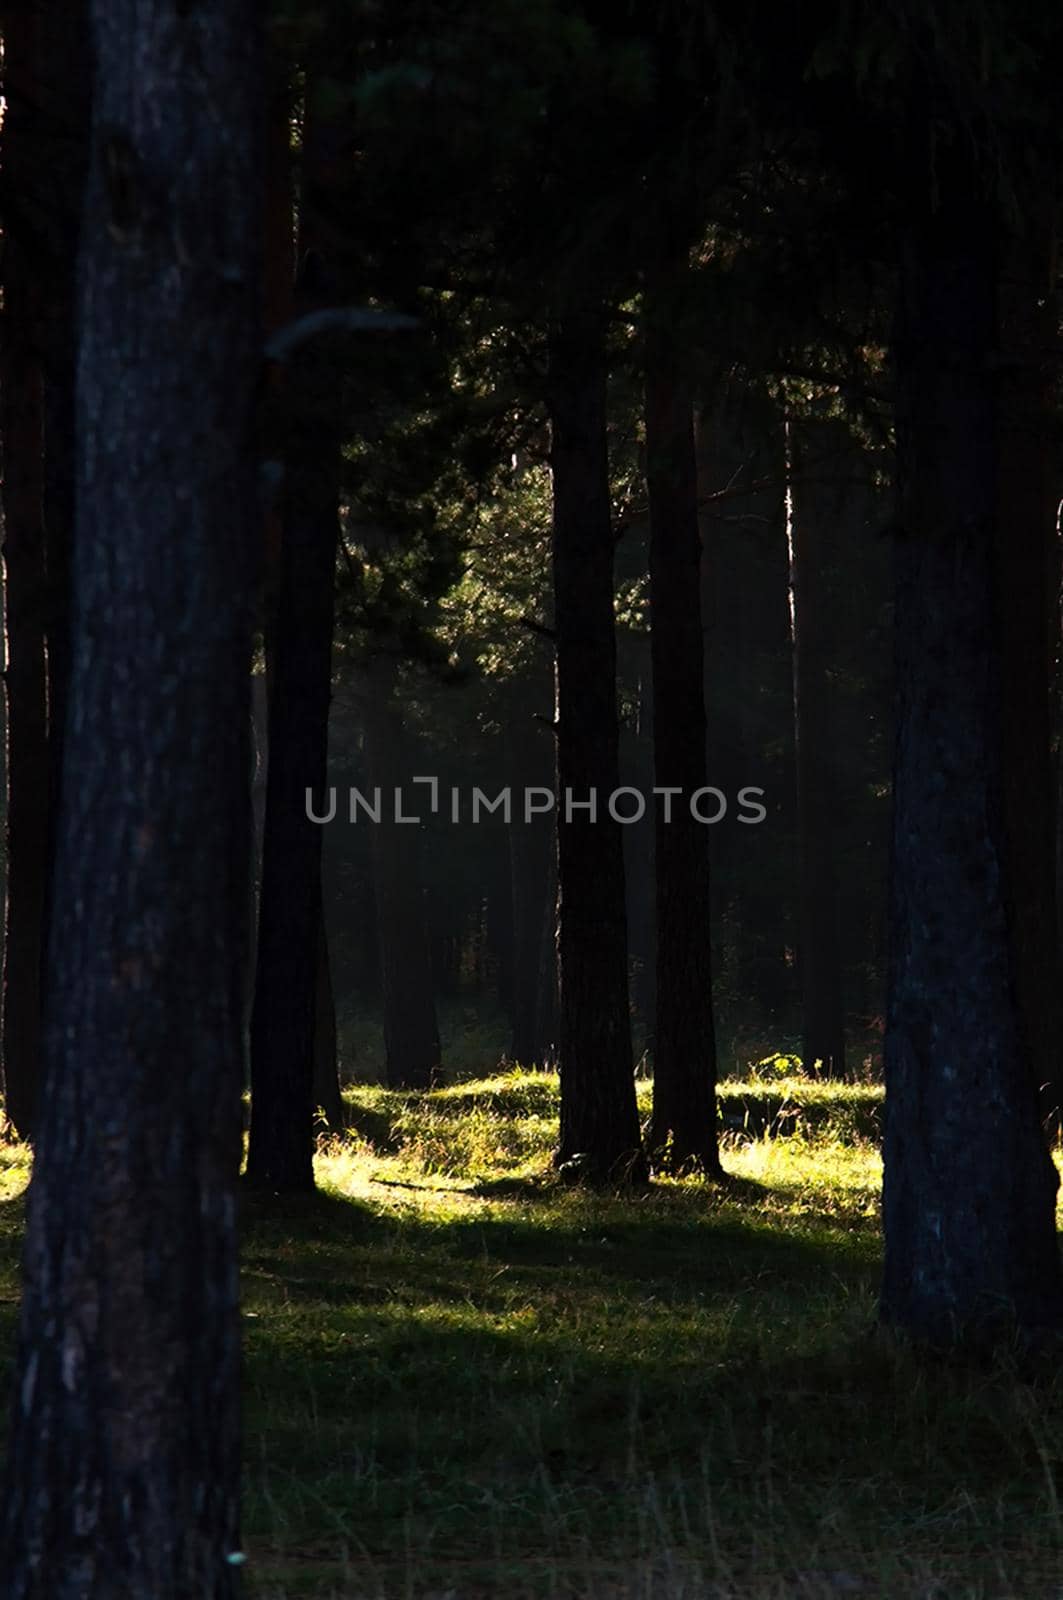 shadow of the coniferous forest. Sunbeams among dark trees. by DePo